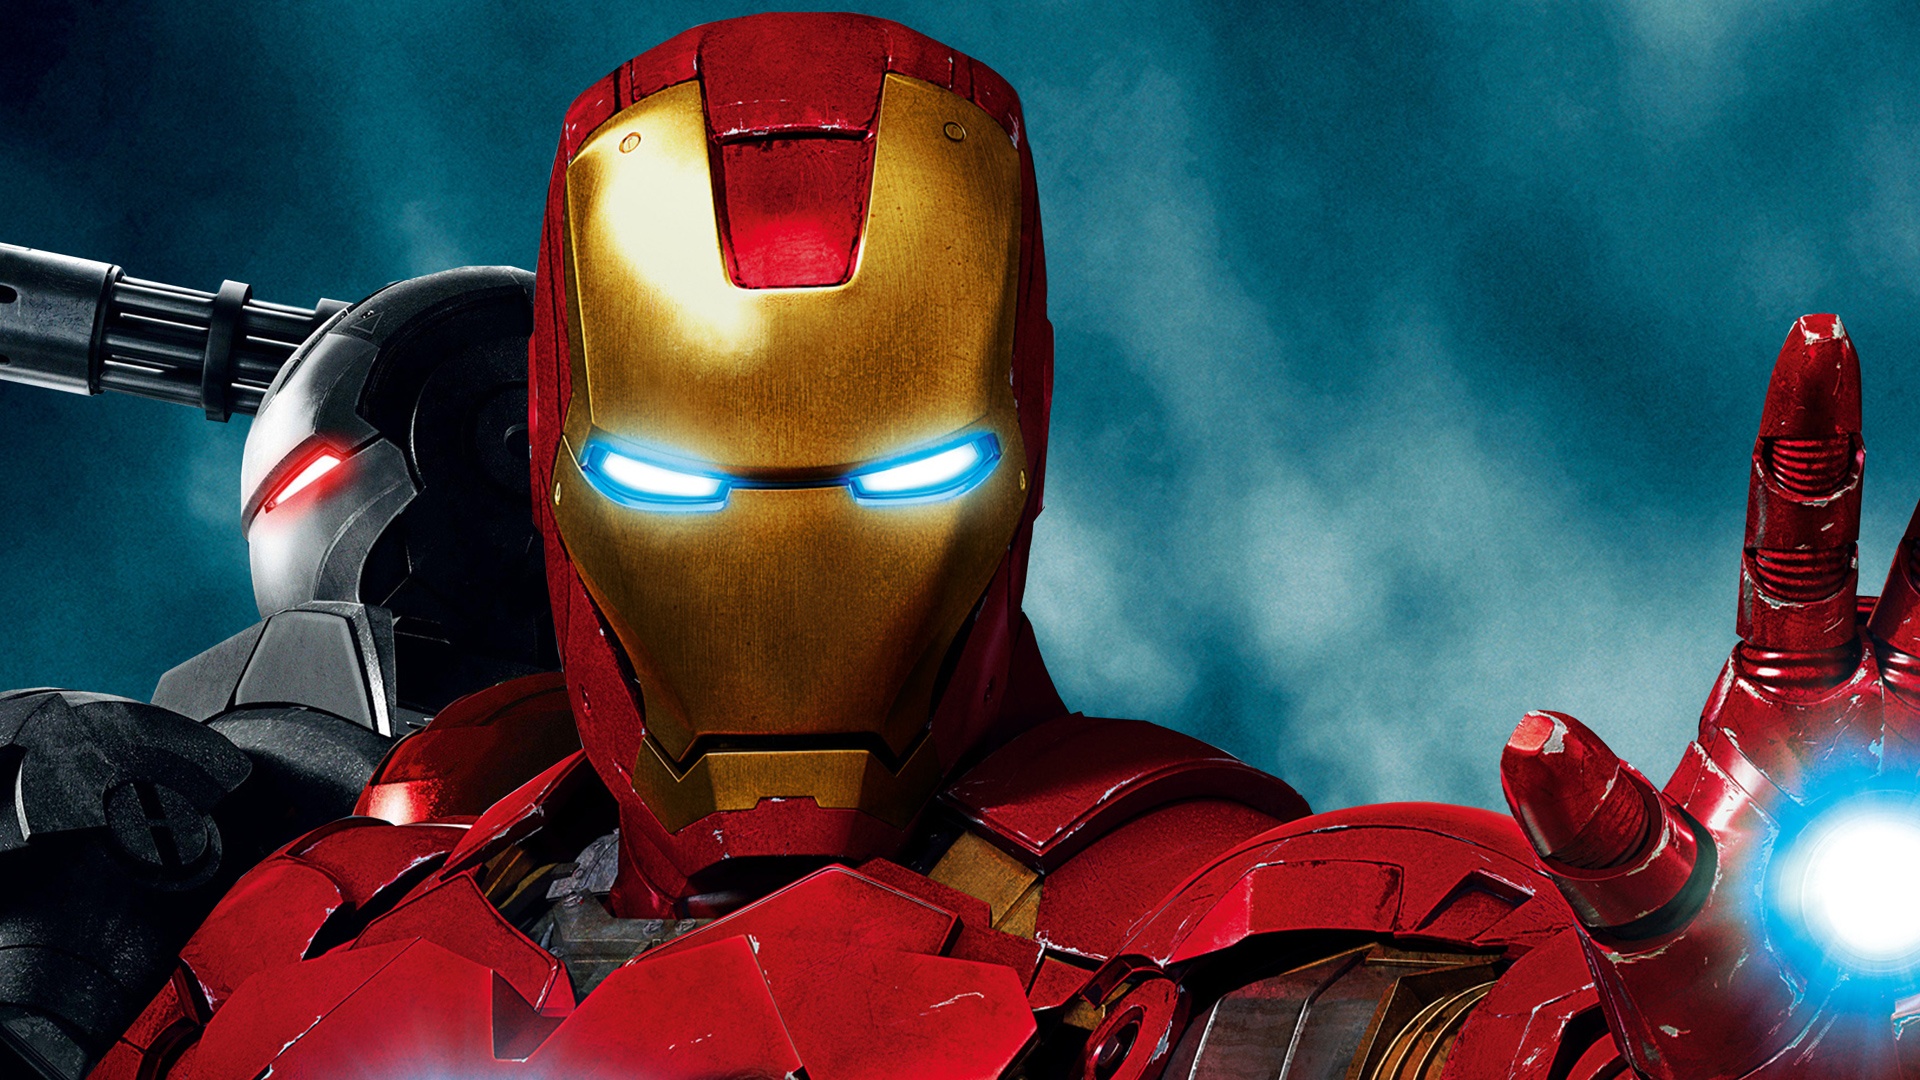 Amazing Iron Man 2 Wallpapers | HD Wallpapers